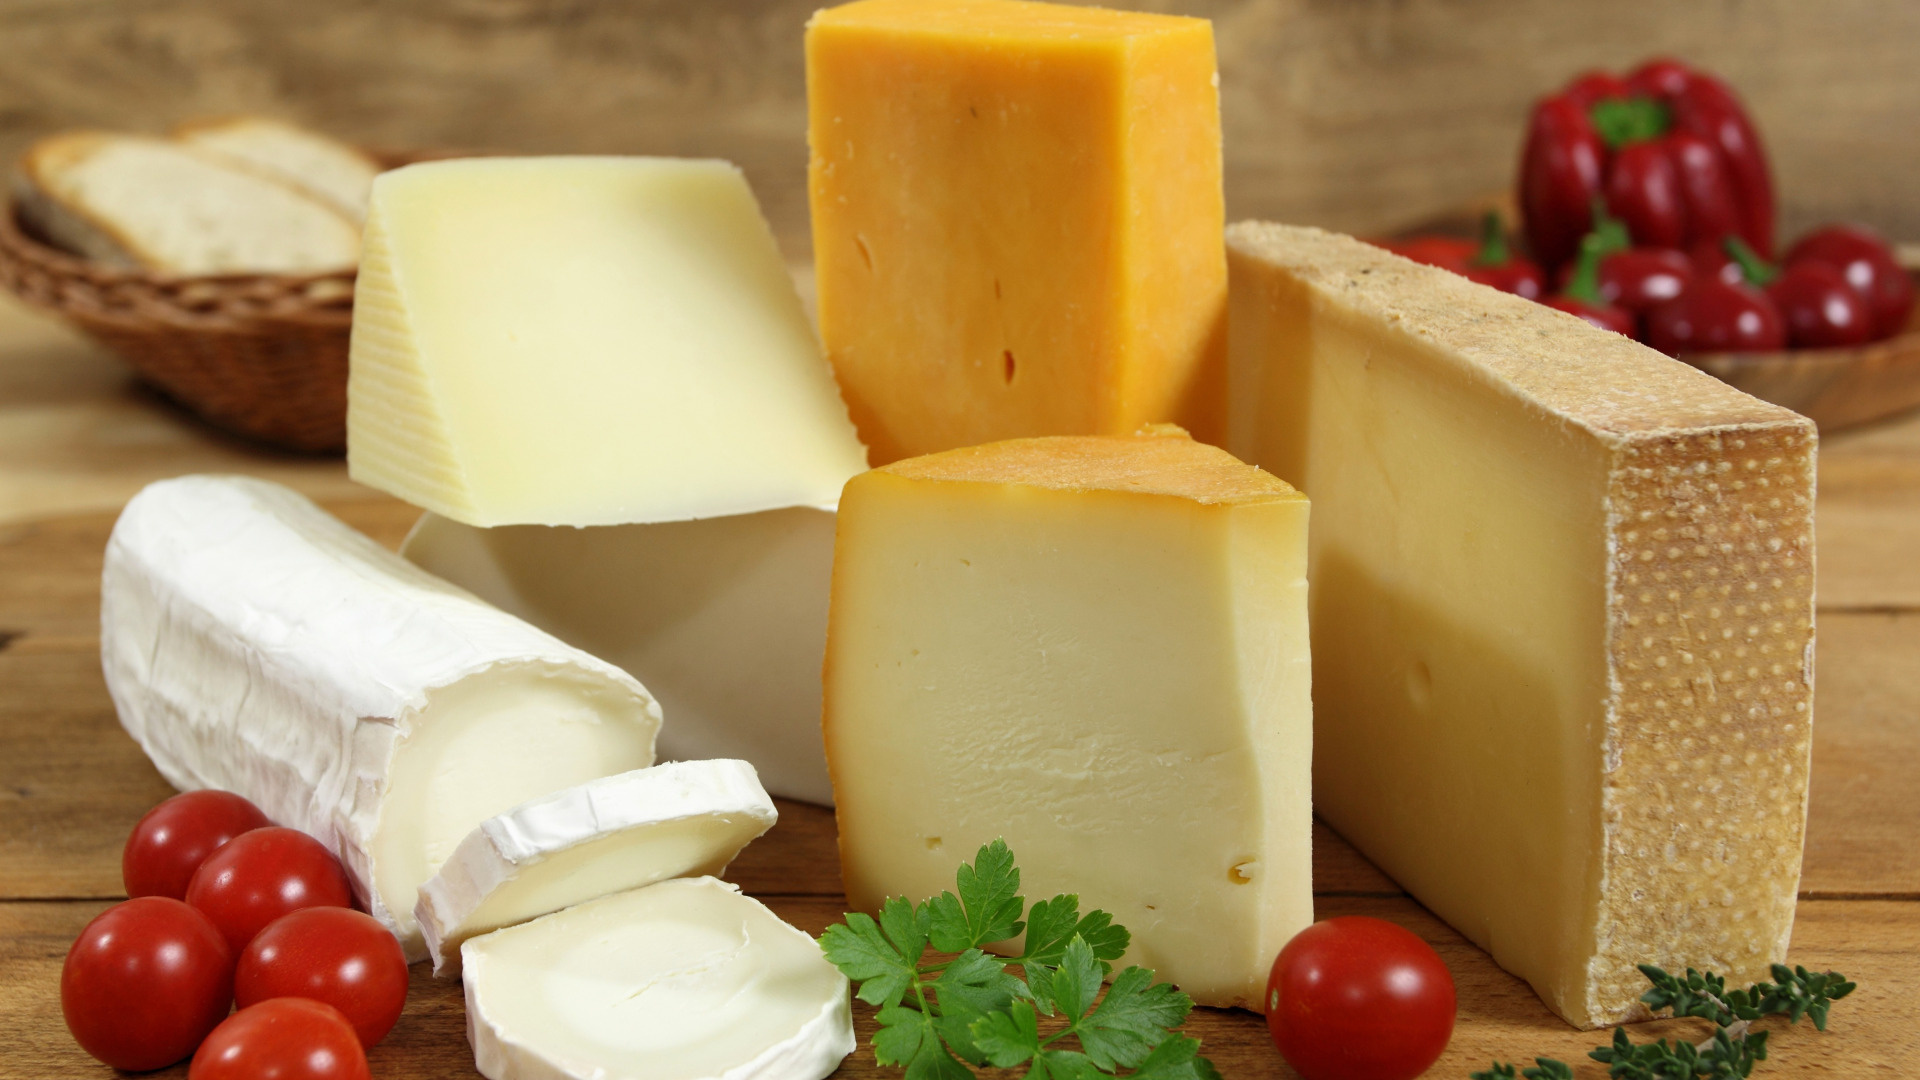 Cheese: The texture can range from soft and spreadable to hard and crumbly. 1920x1080 Full HD Background.